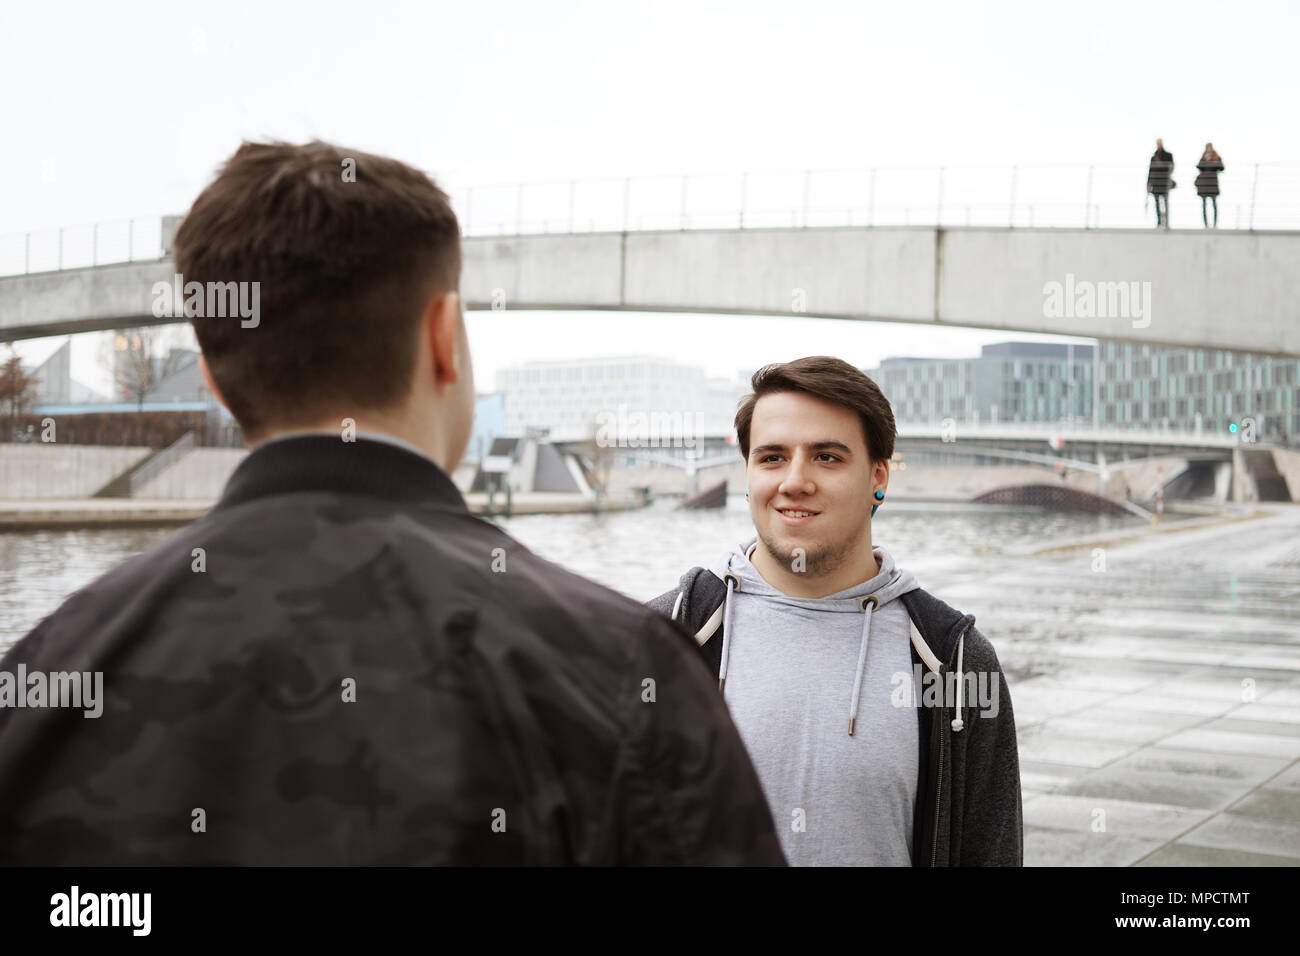 two male teenage friends having a conversation, lifestyle or city life concept, urban riverside location in Berlin Germany Stock Photo